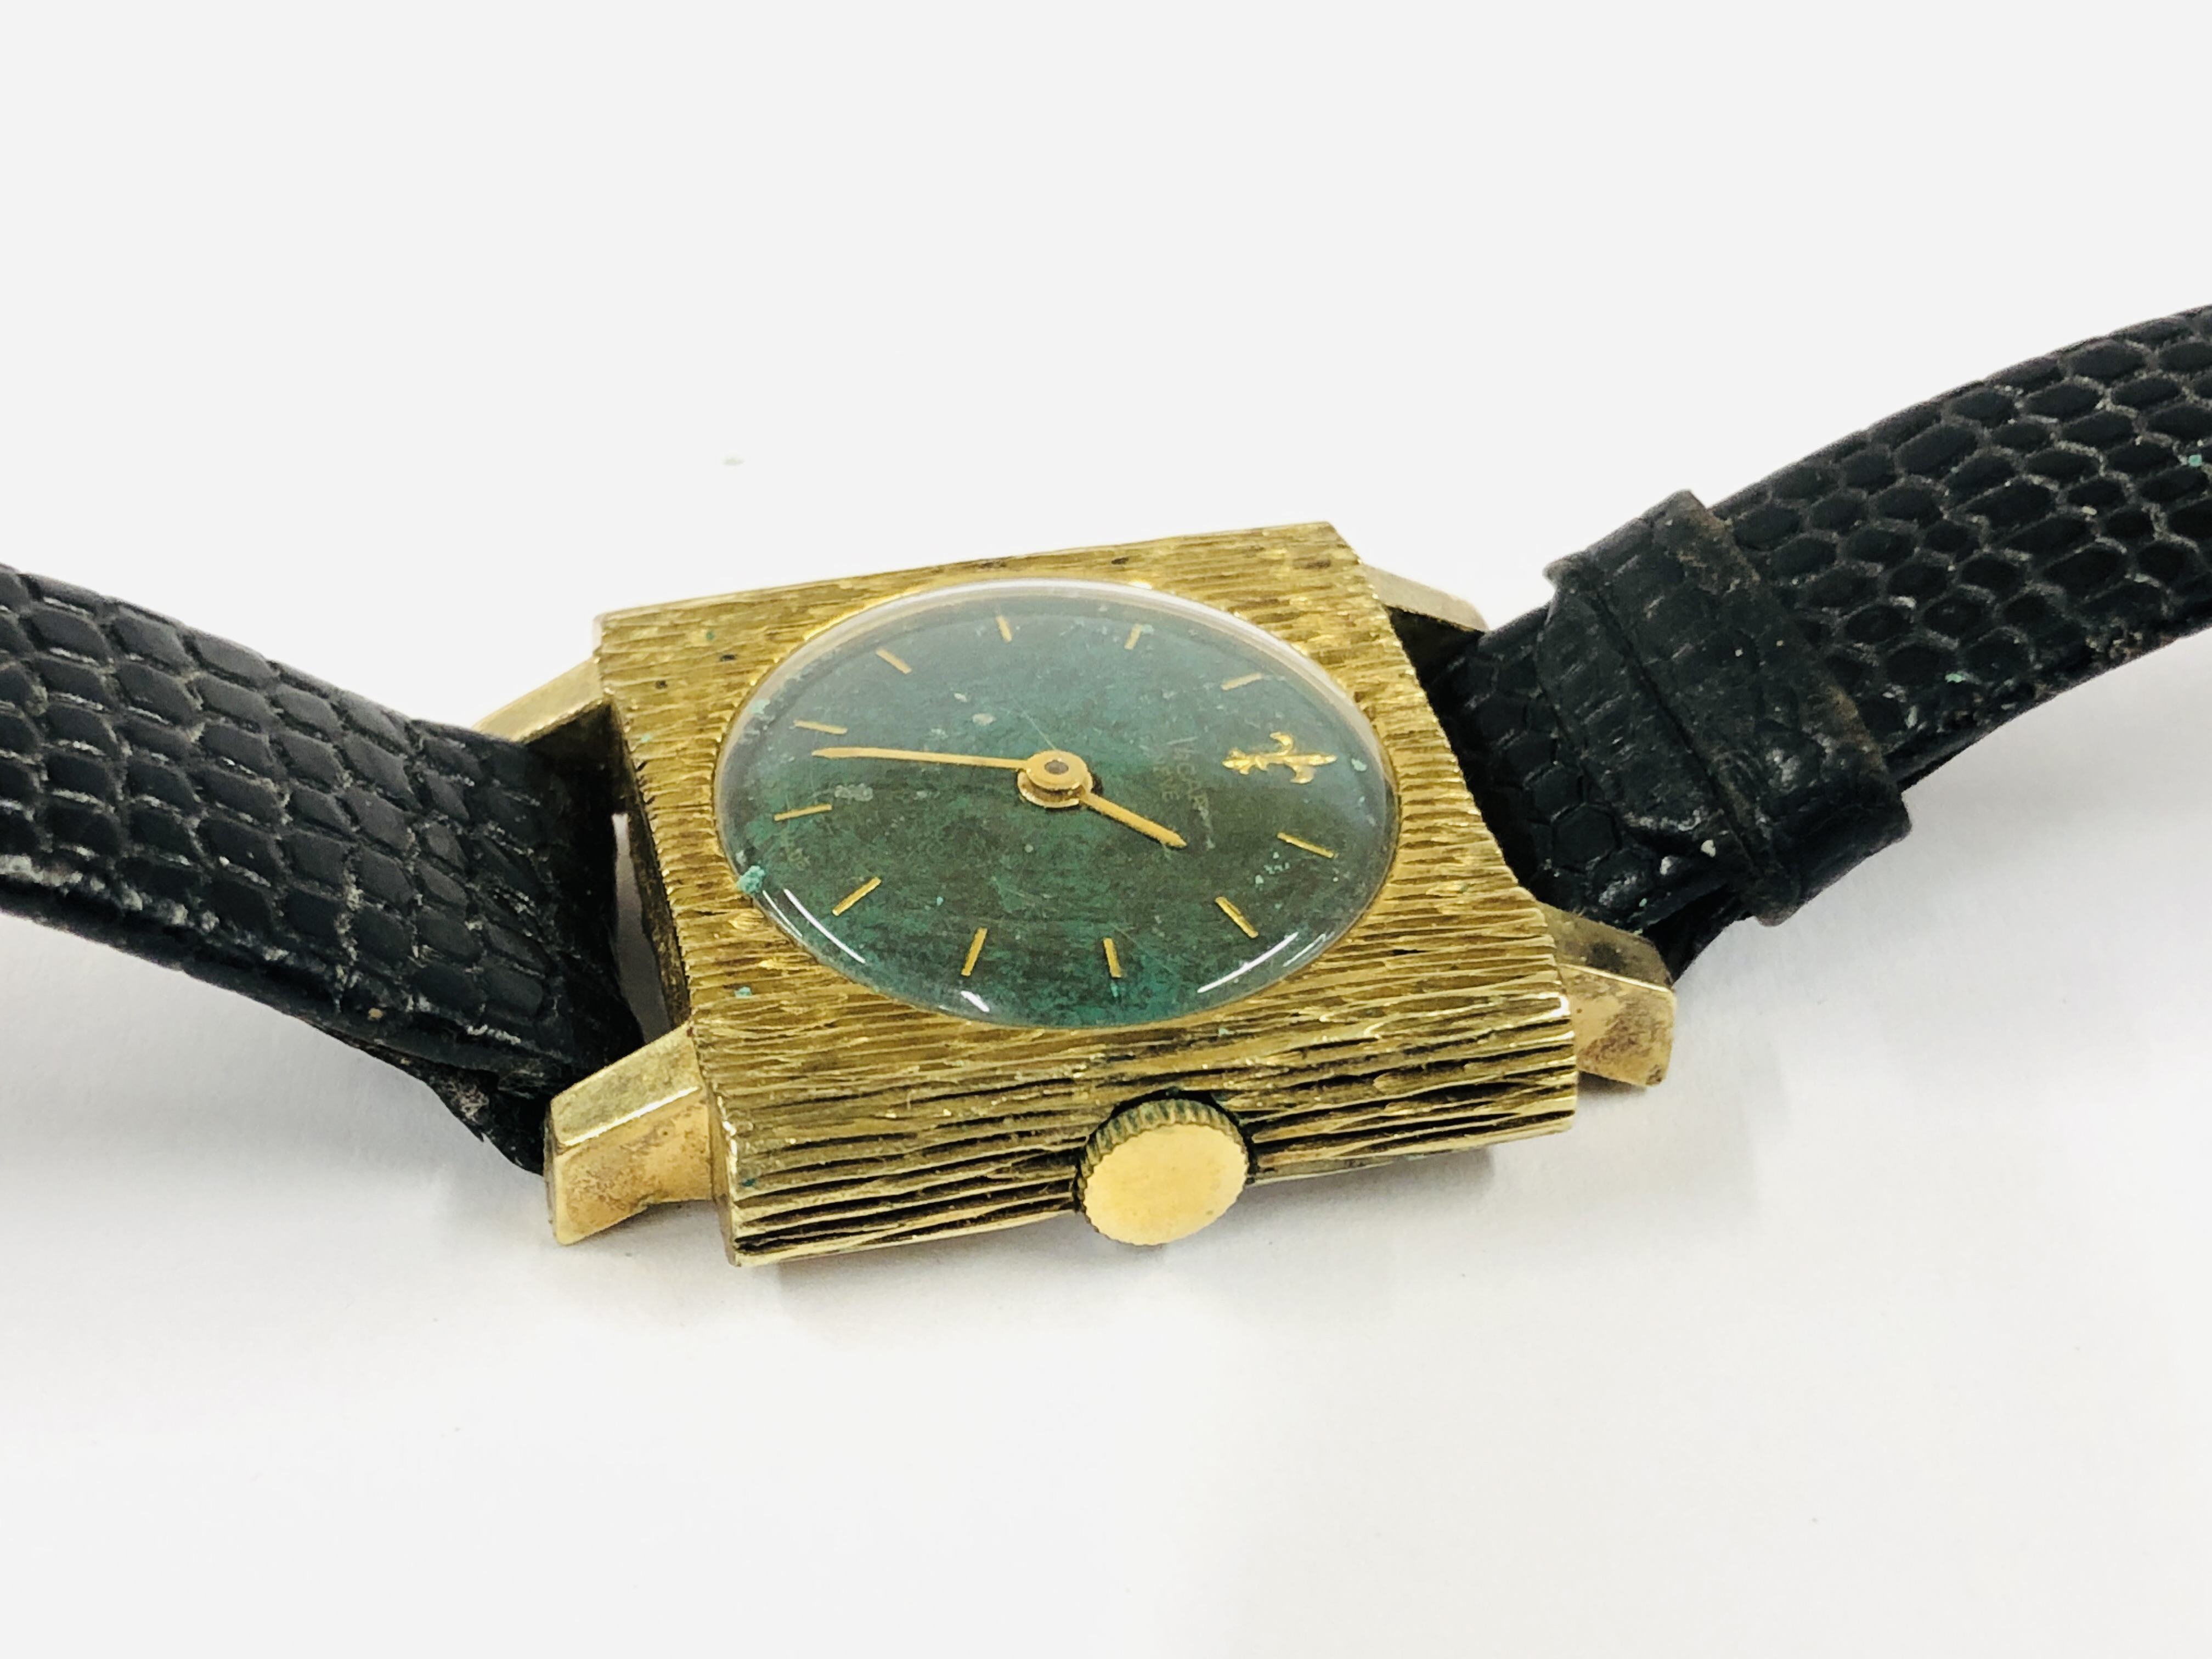 A LADIES RETRO SARCAR WRIST WATCH WITH GREEN COLOURED DIAL ON LEATHER STRAP. - Image 3 of 10